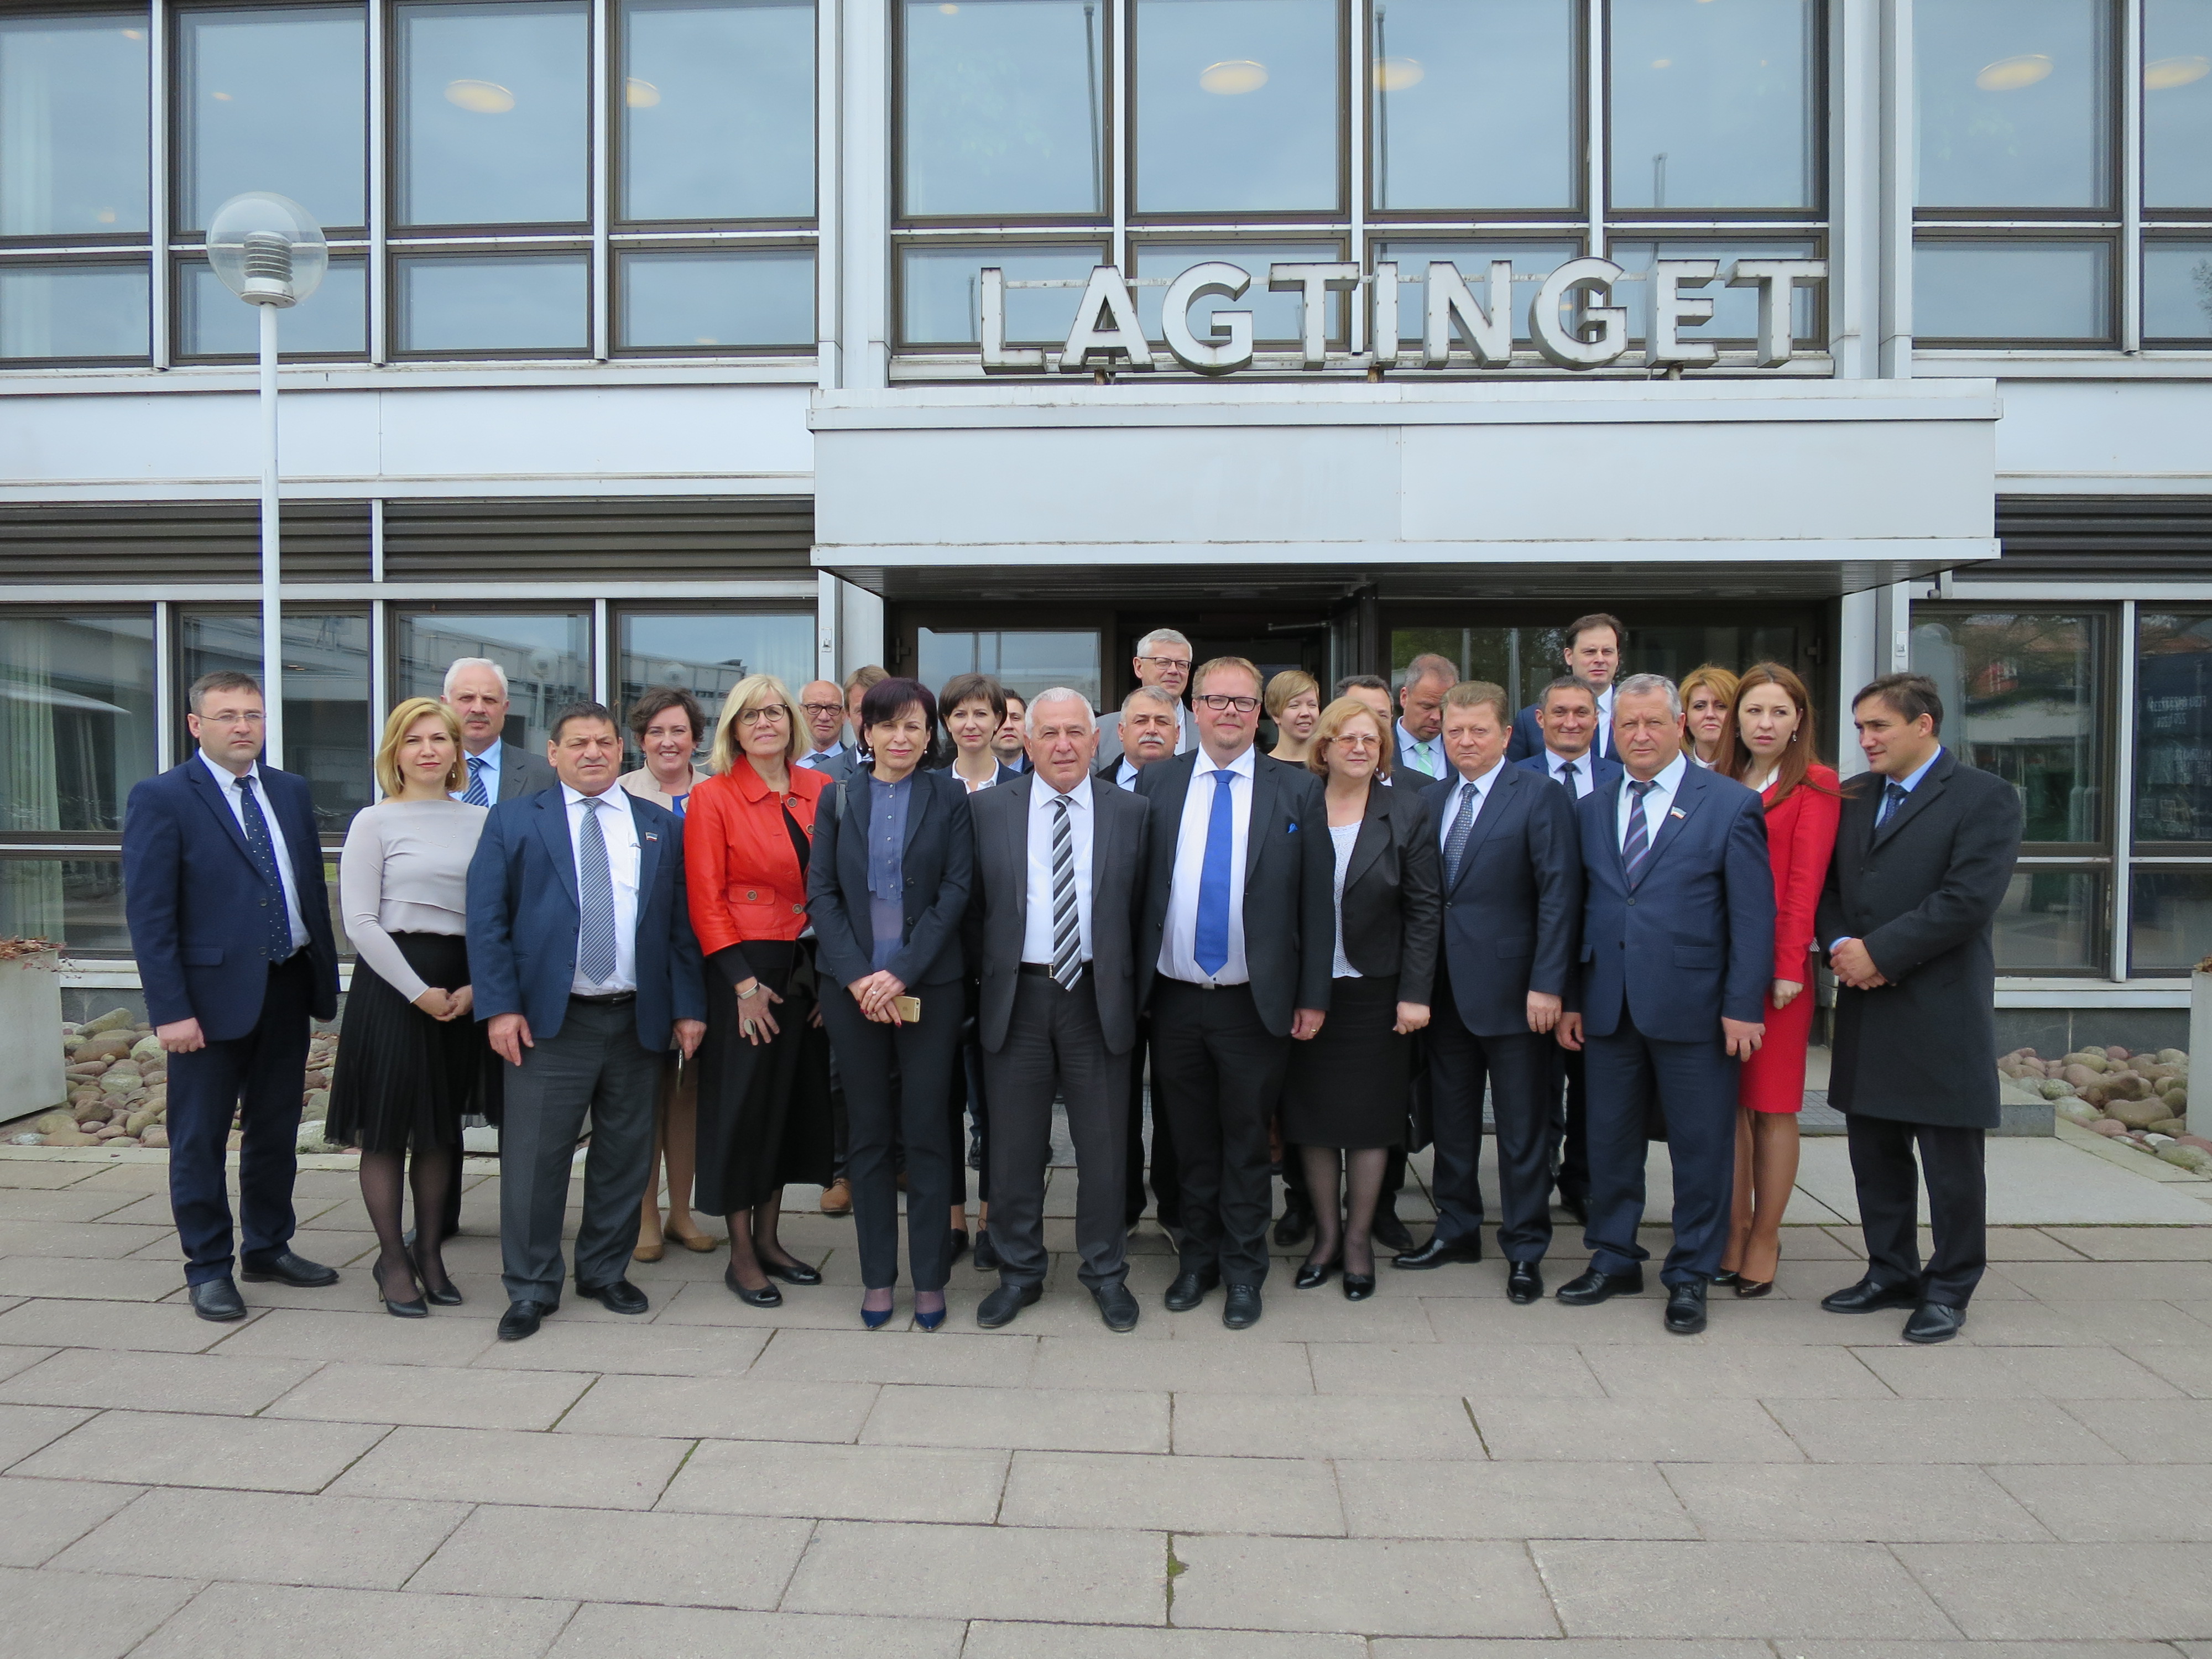 While in Mariehamn the group was hosted by the Parliament of Åland (the Lagting).